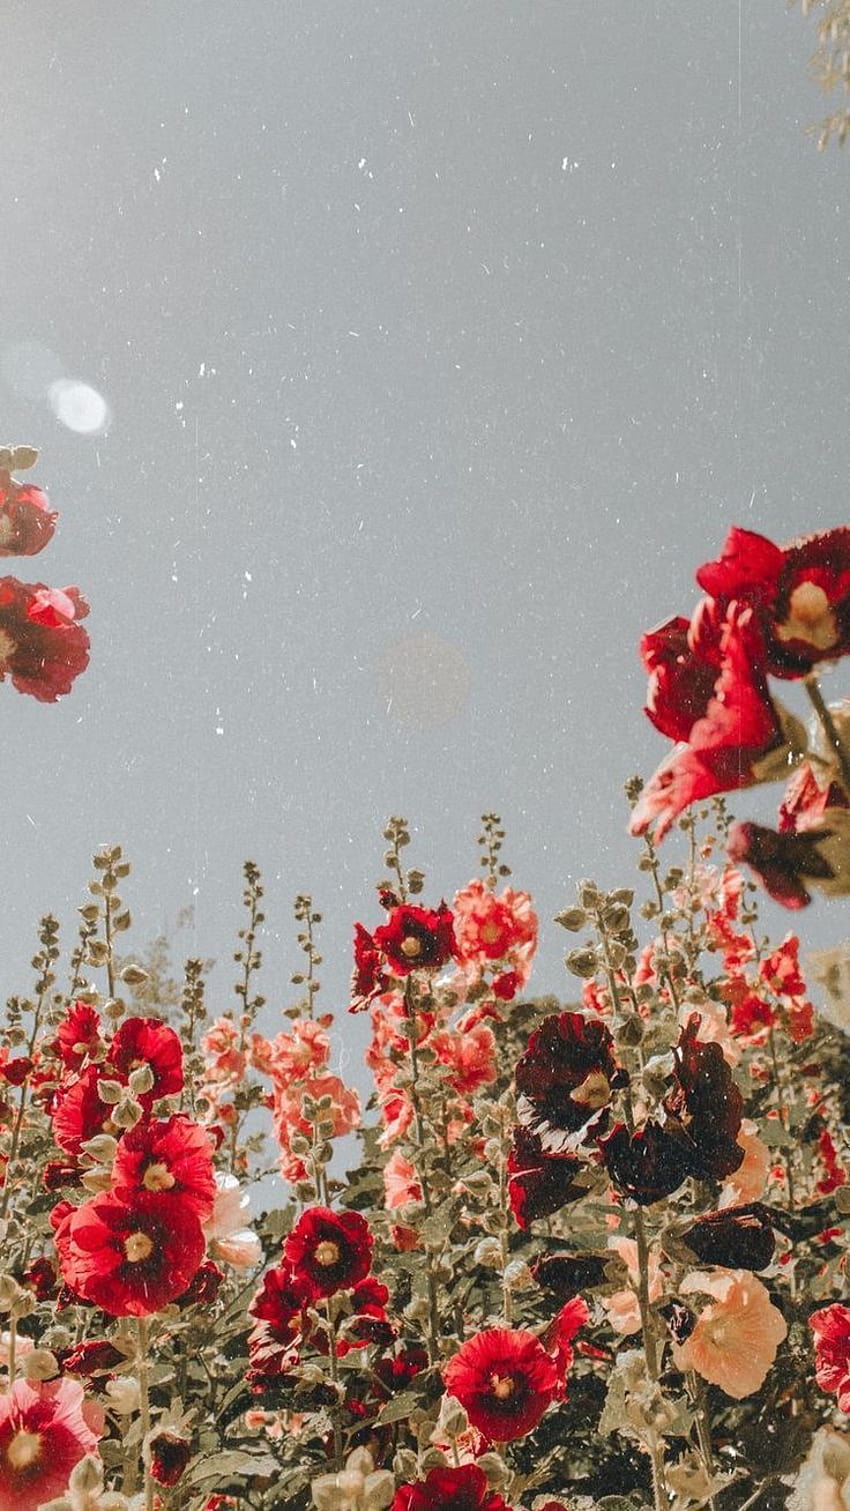 Red flowers with white background photo  Free Aesthetic wallpaper Image on  Unsplash